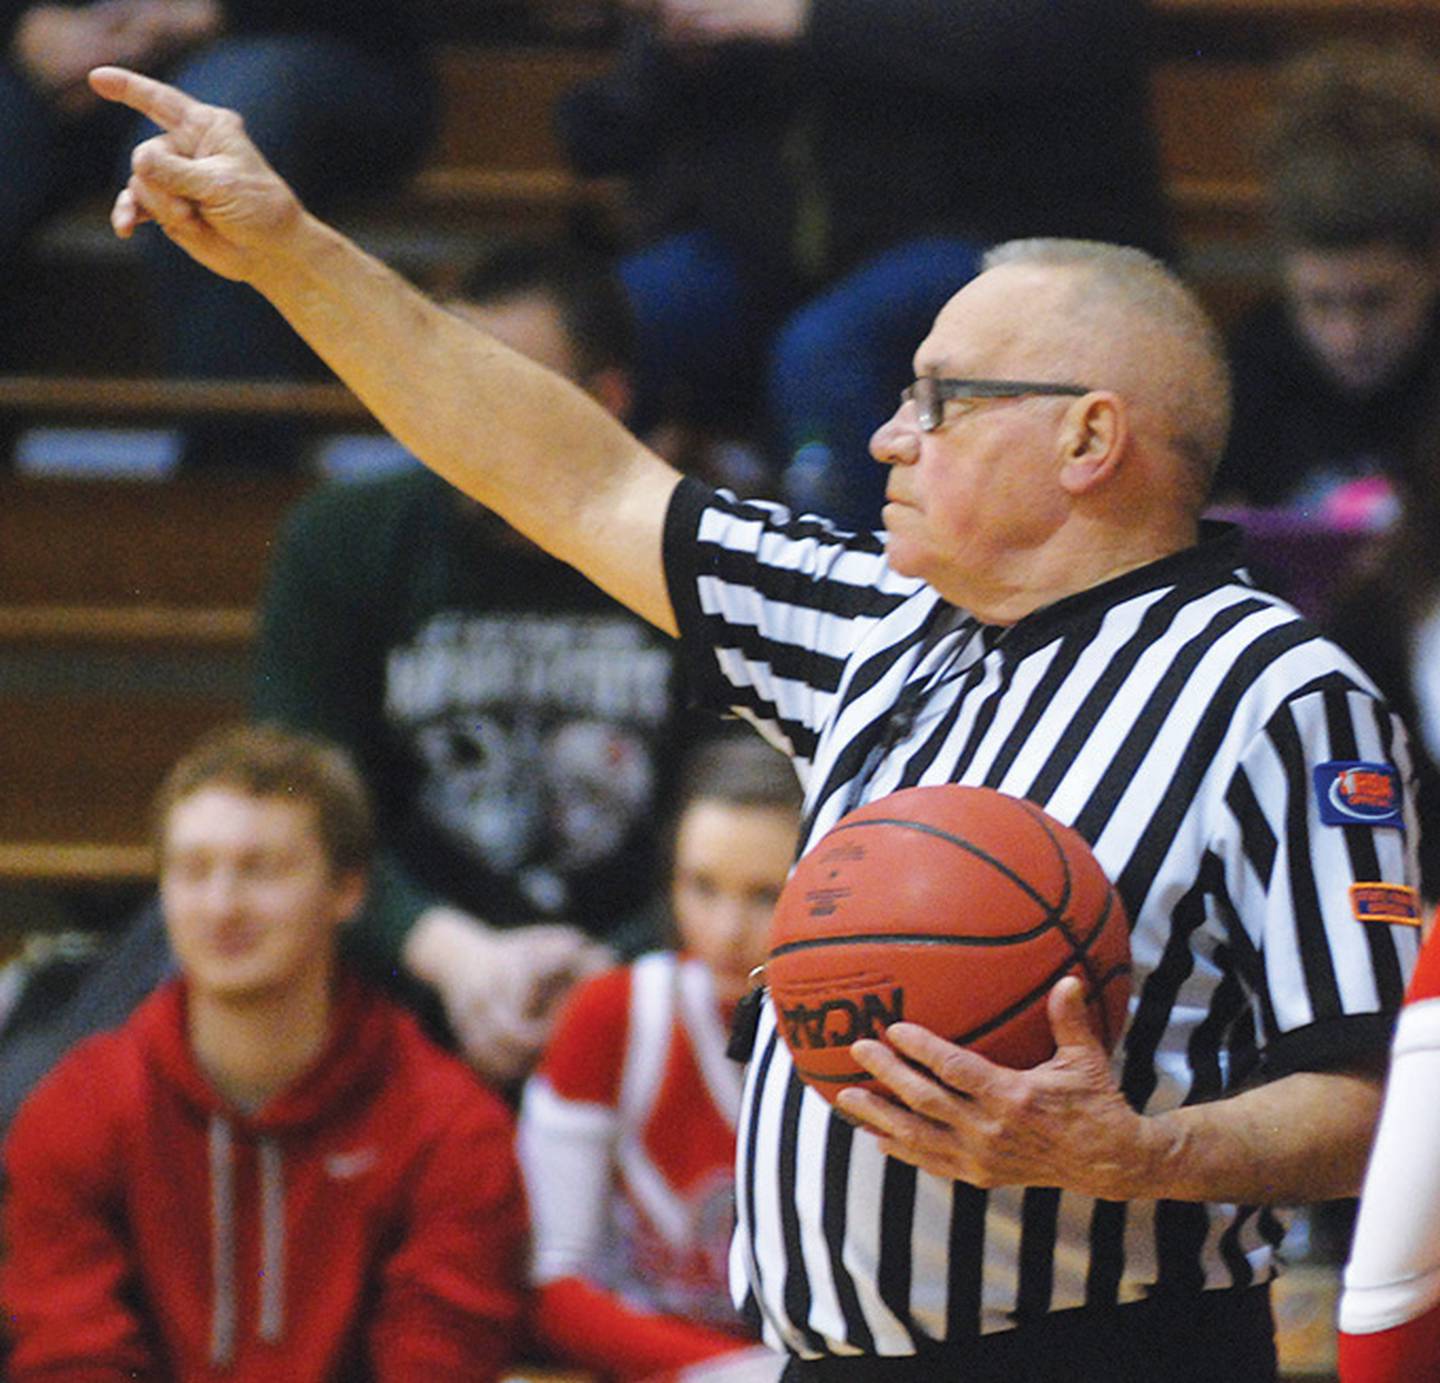 Don Cook signals during a Big Northern Conference basketball game in 2015. Cook retired as a basketball official after the 2015 season, but is still in charge of assigning officials to games for the Big Northern Conference – a job that has been made much harder by the COVID-19 pandemic.